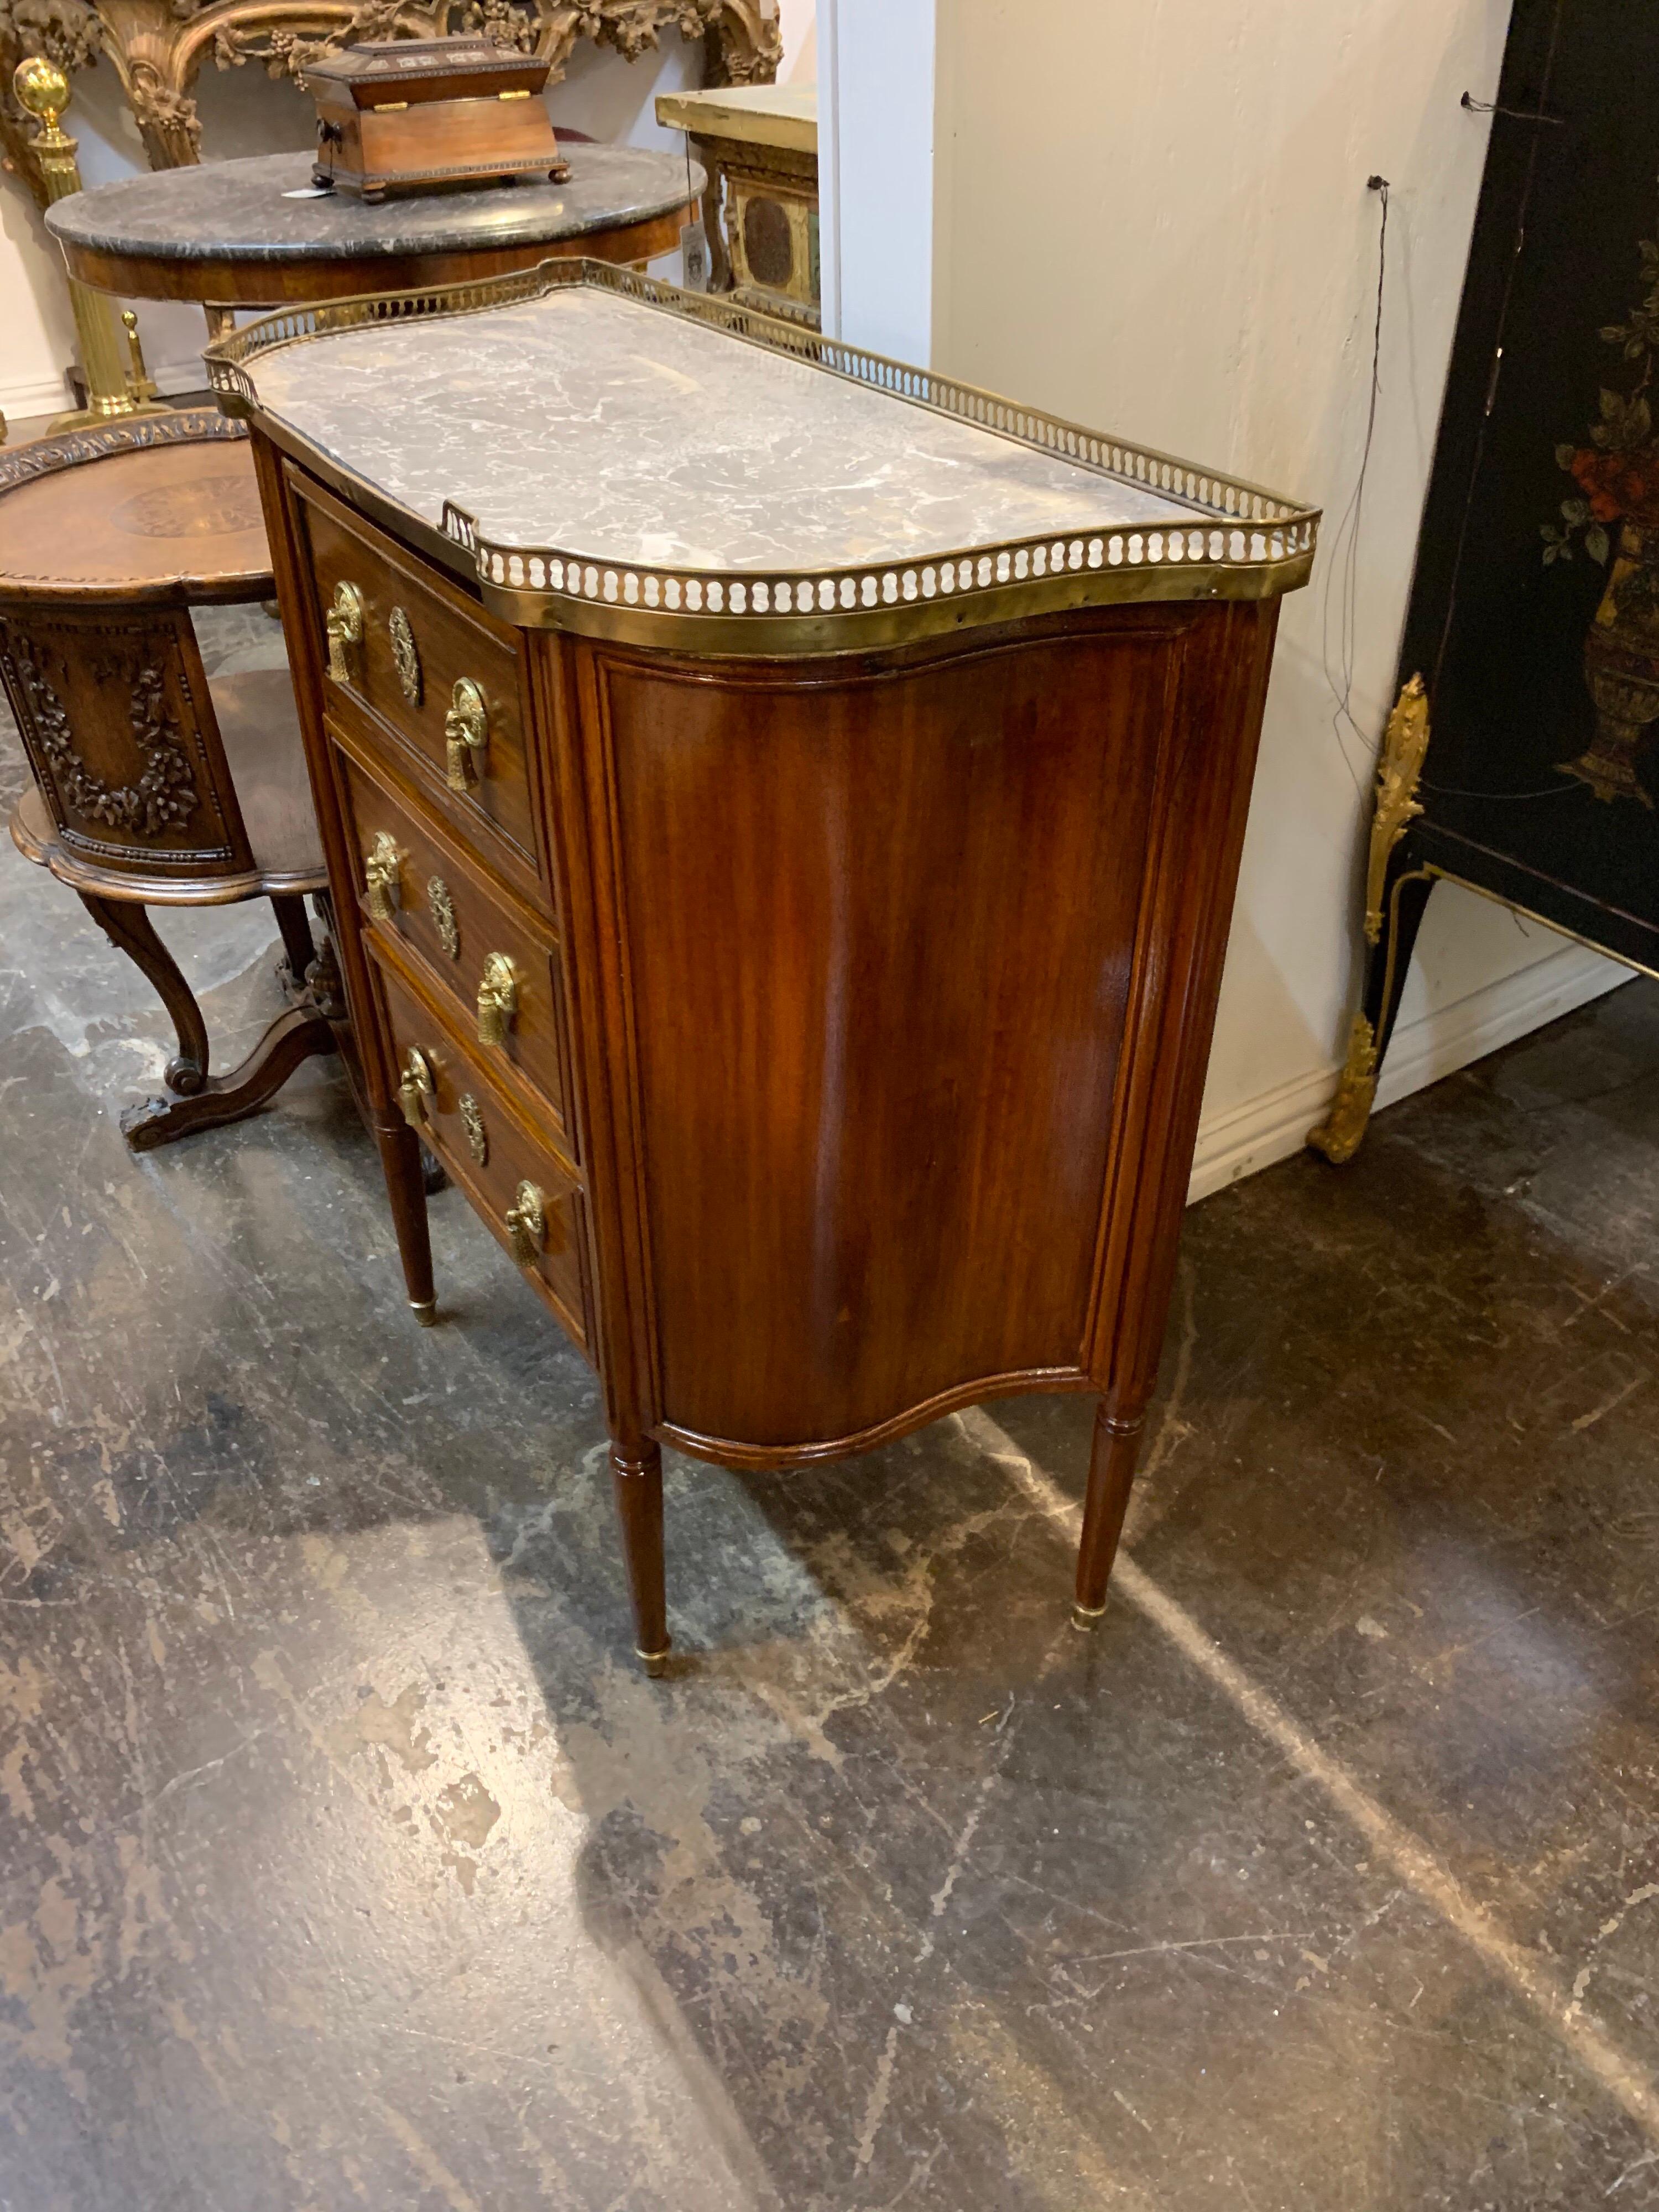 Lovely 19th century French carved mahogany Directoire' style side cabinet with original grey marble top. Great finish on the piece and beautiful brass hardware. So stylish for a variety of decors!
  